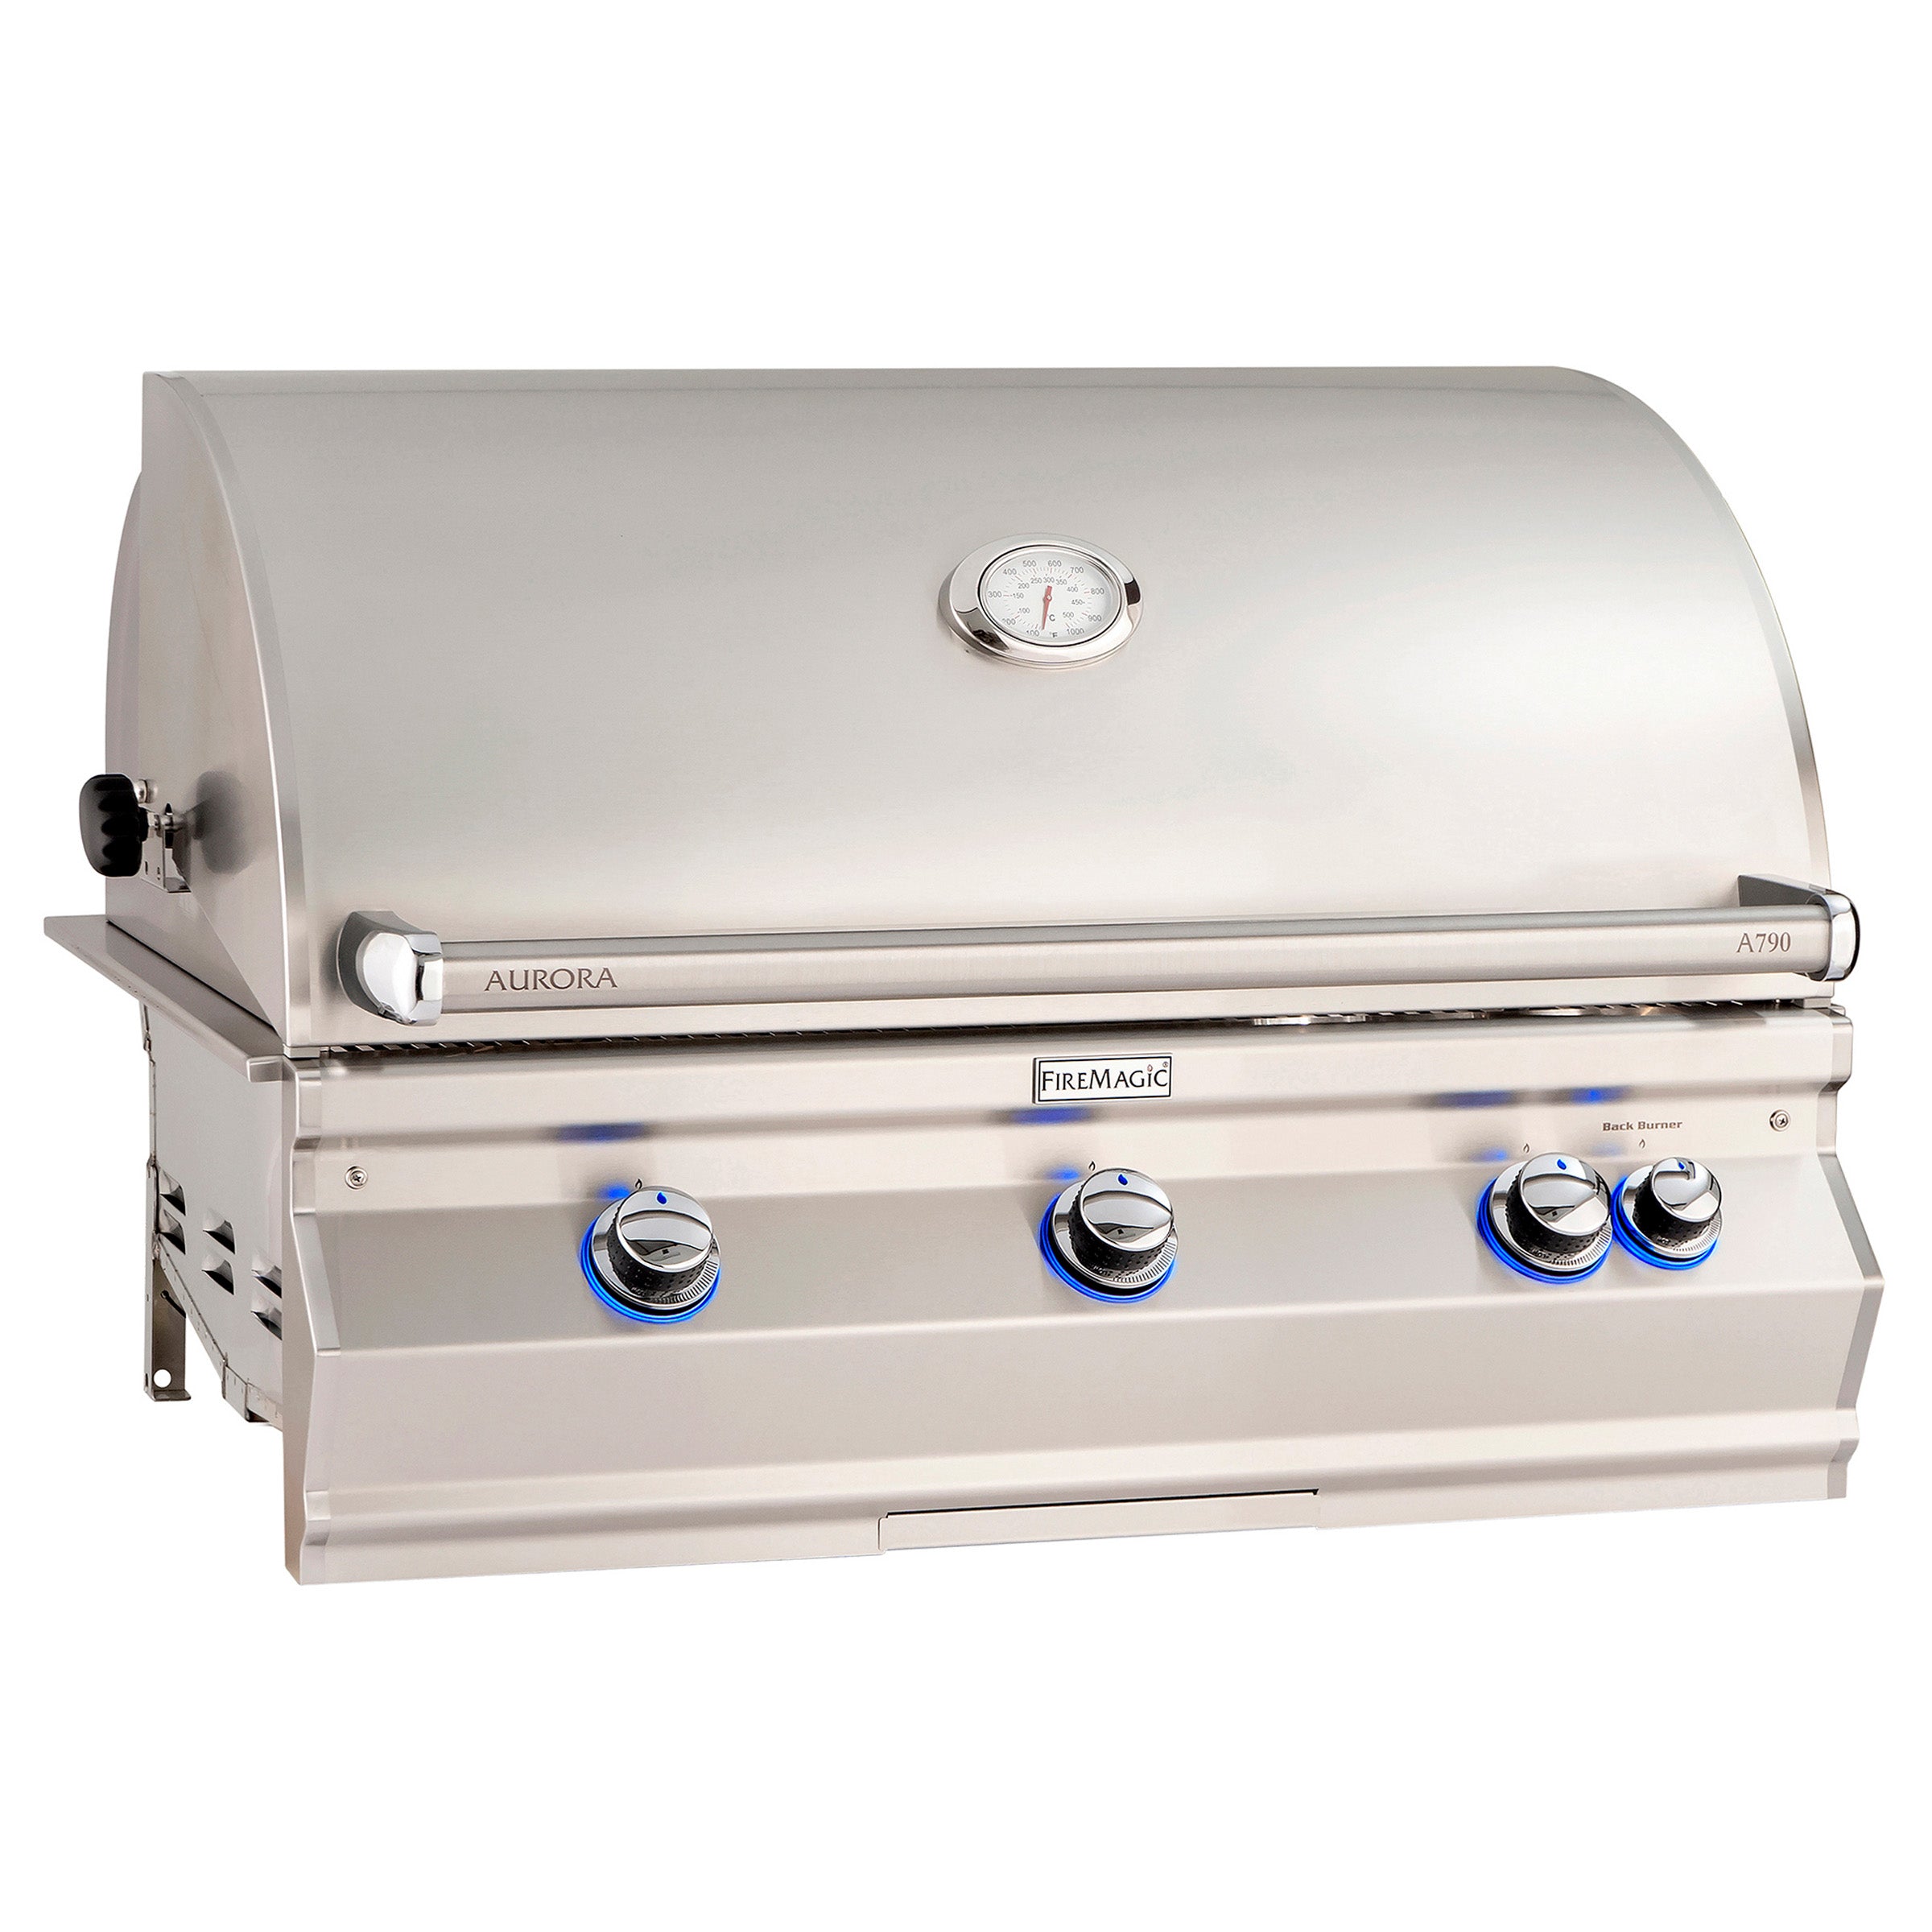 Fire Magic Aurora A790i Built-In Grill with Back Burner